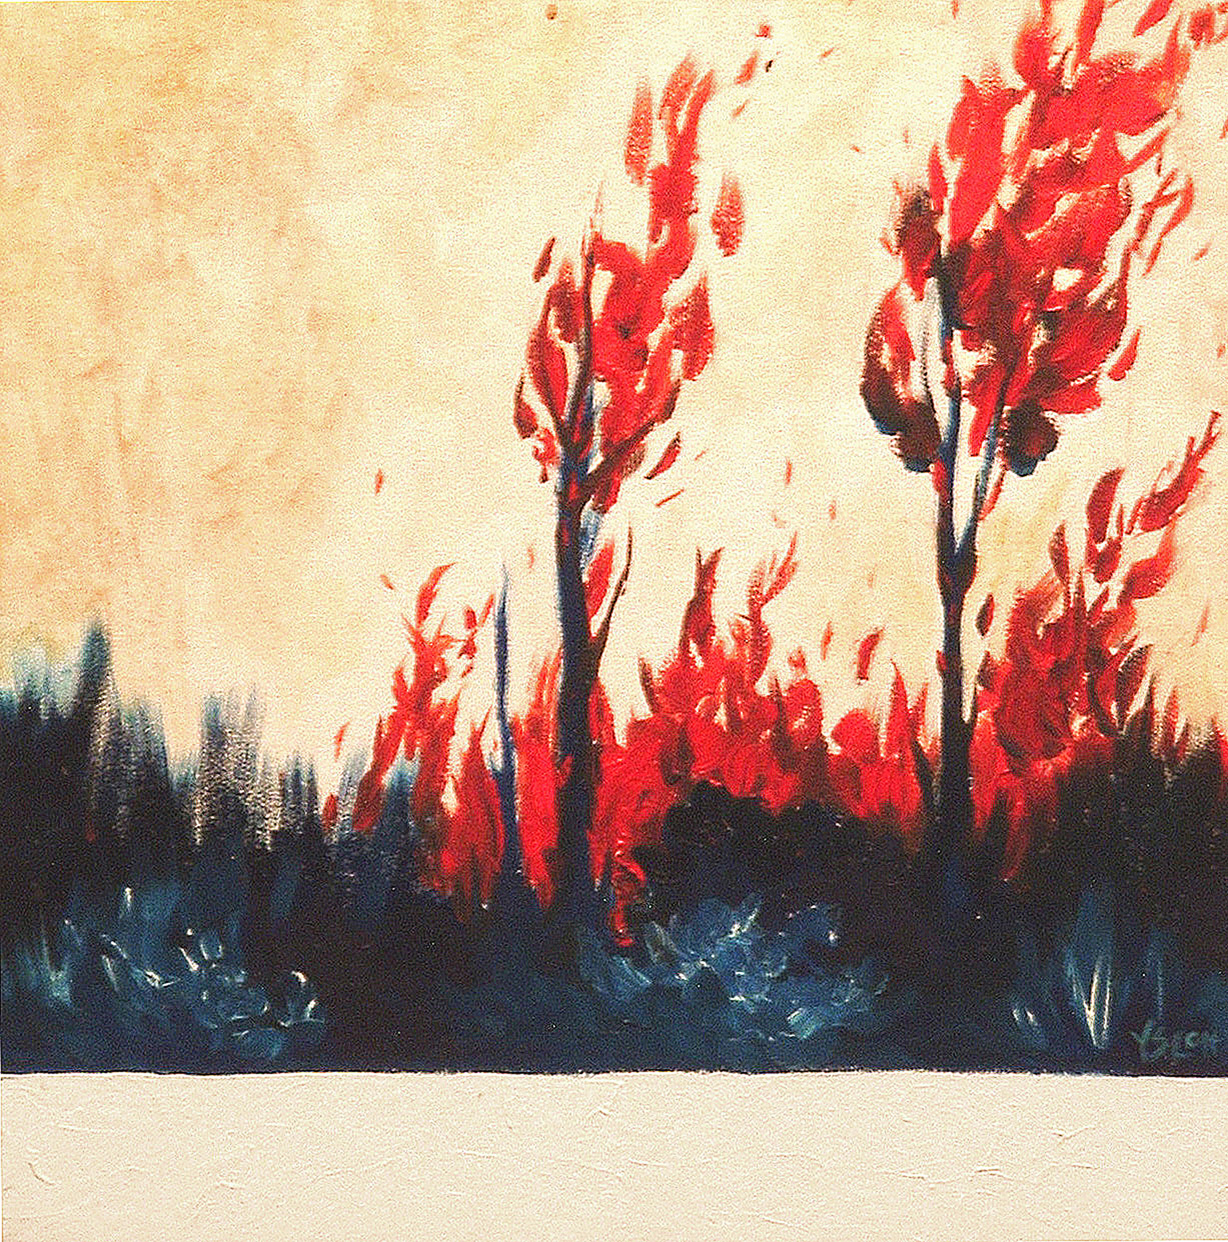  I don't even remember what year is was, but I was living in Florida, and the Everglades had already been burning for 3 days at that time. Red, red fire on blue, blue wetlands.   Burning Landscape No.1   oil on canvas, 12 x 12 